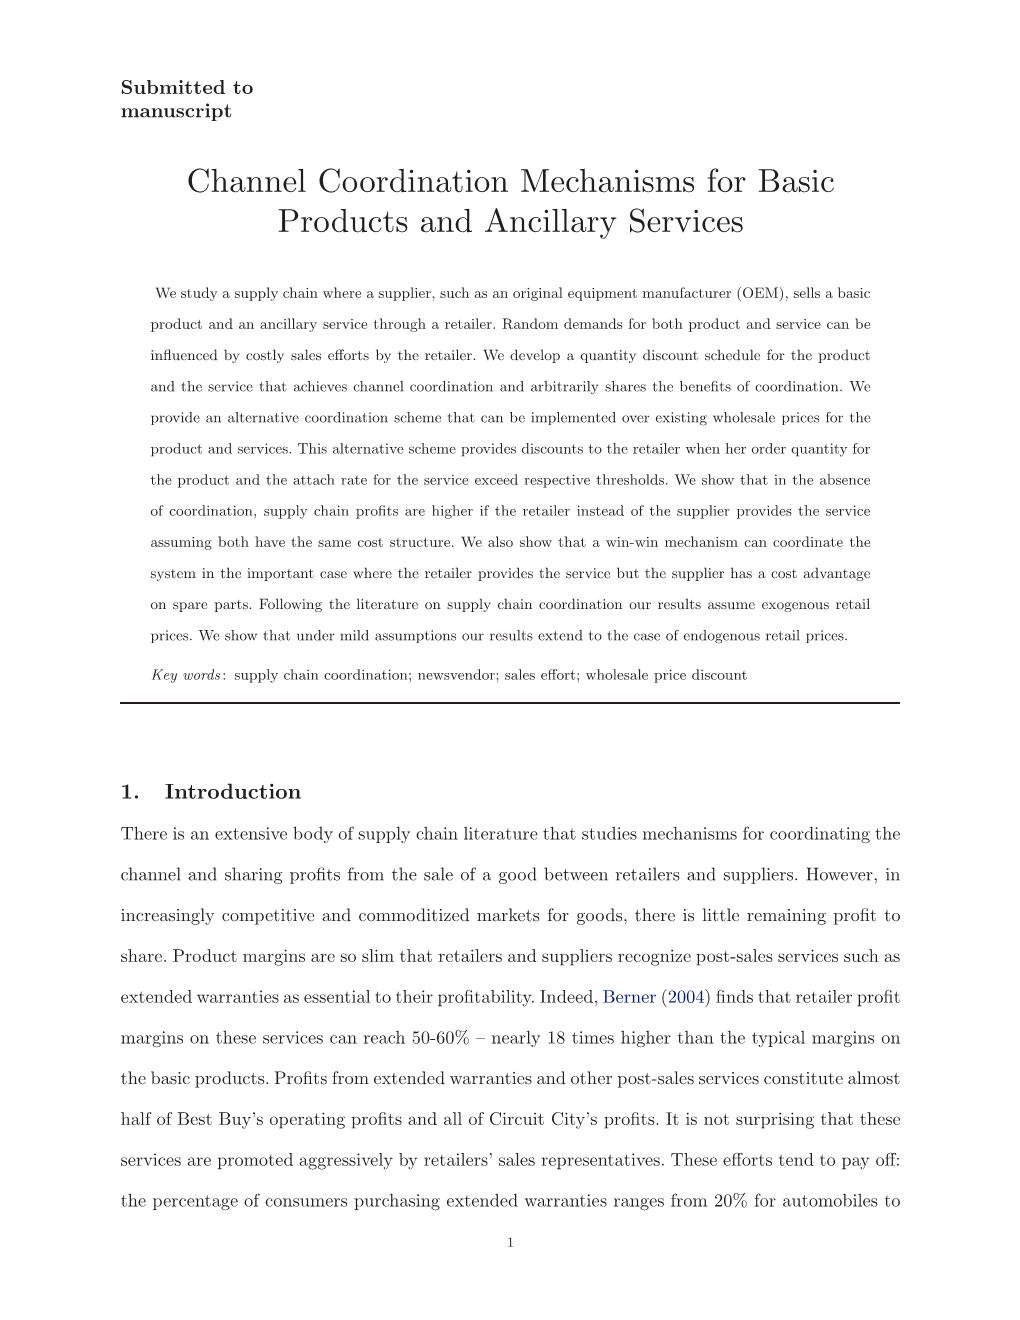 Channel Coordination Mechanisms for Basic Products and Ancillary Services